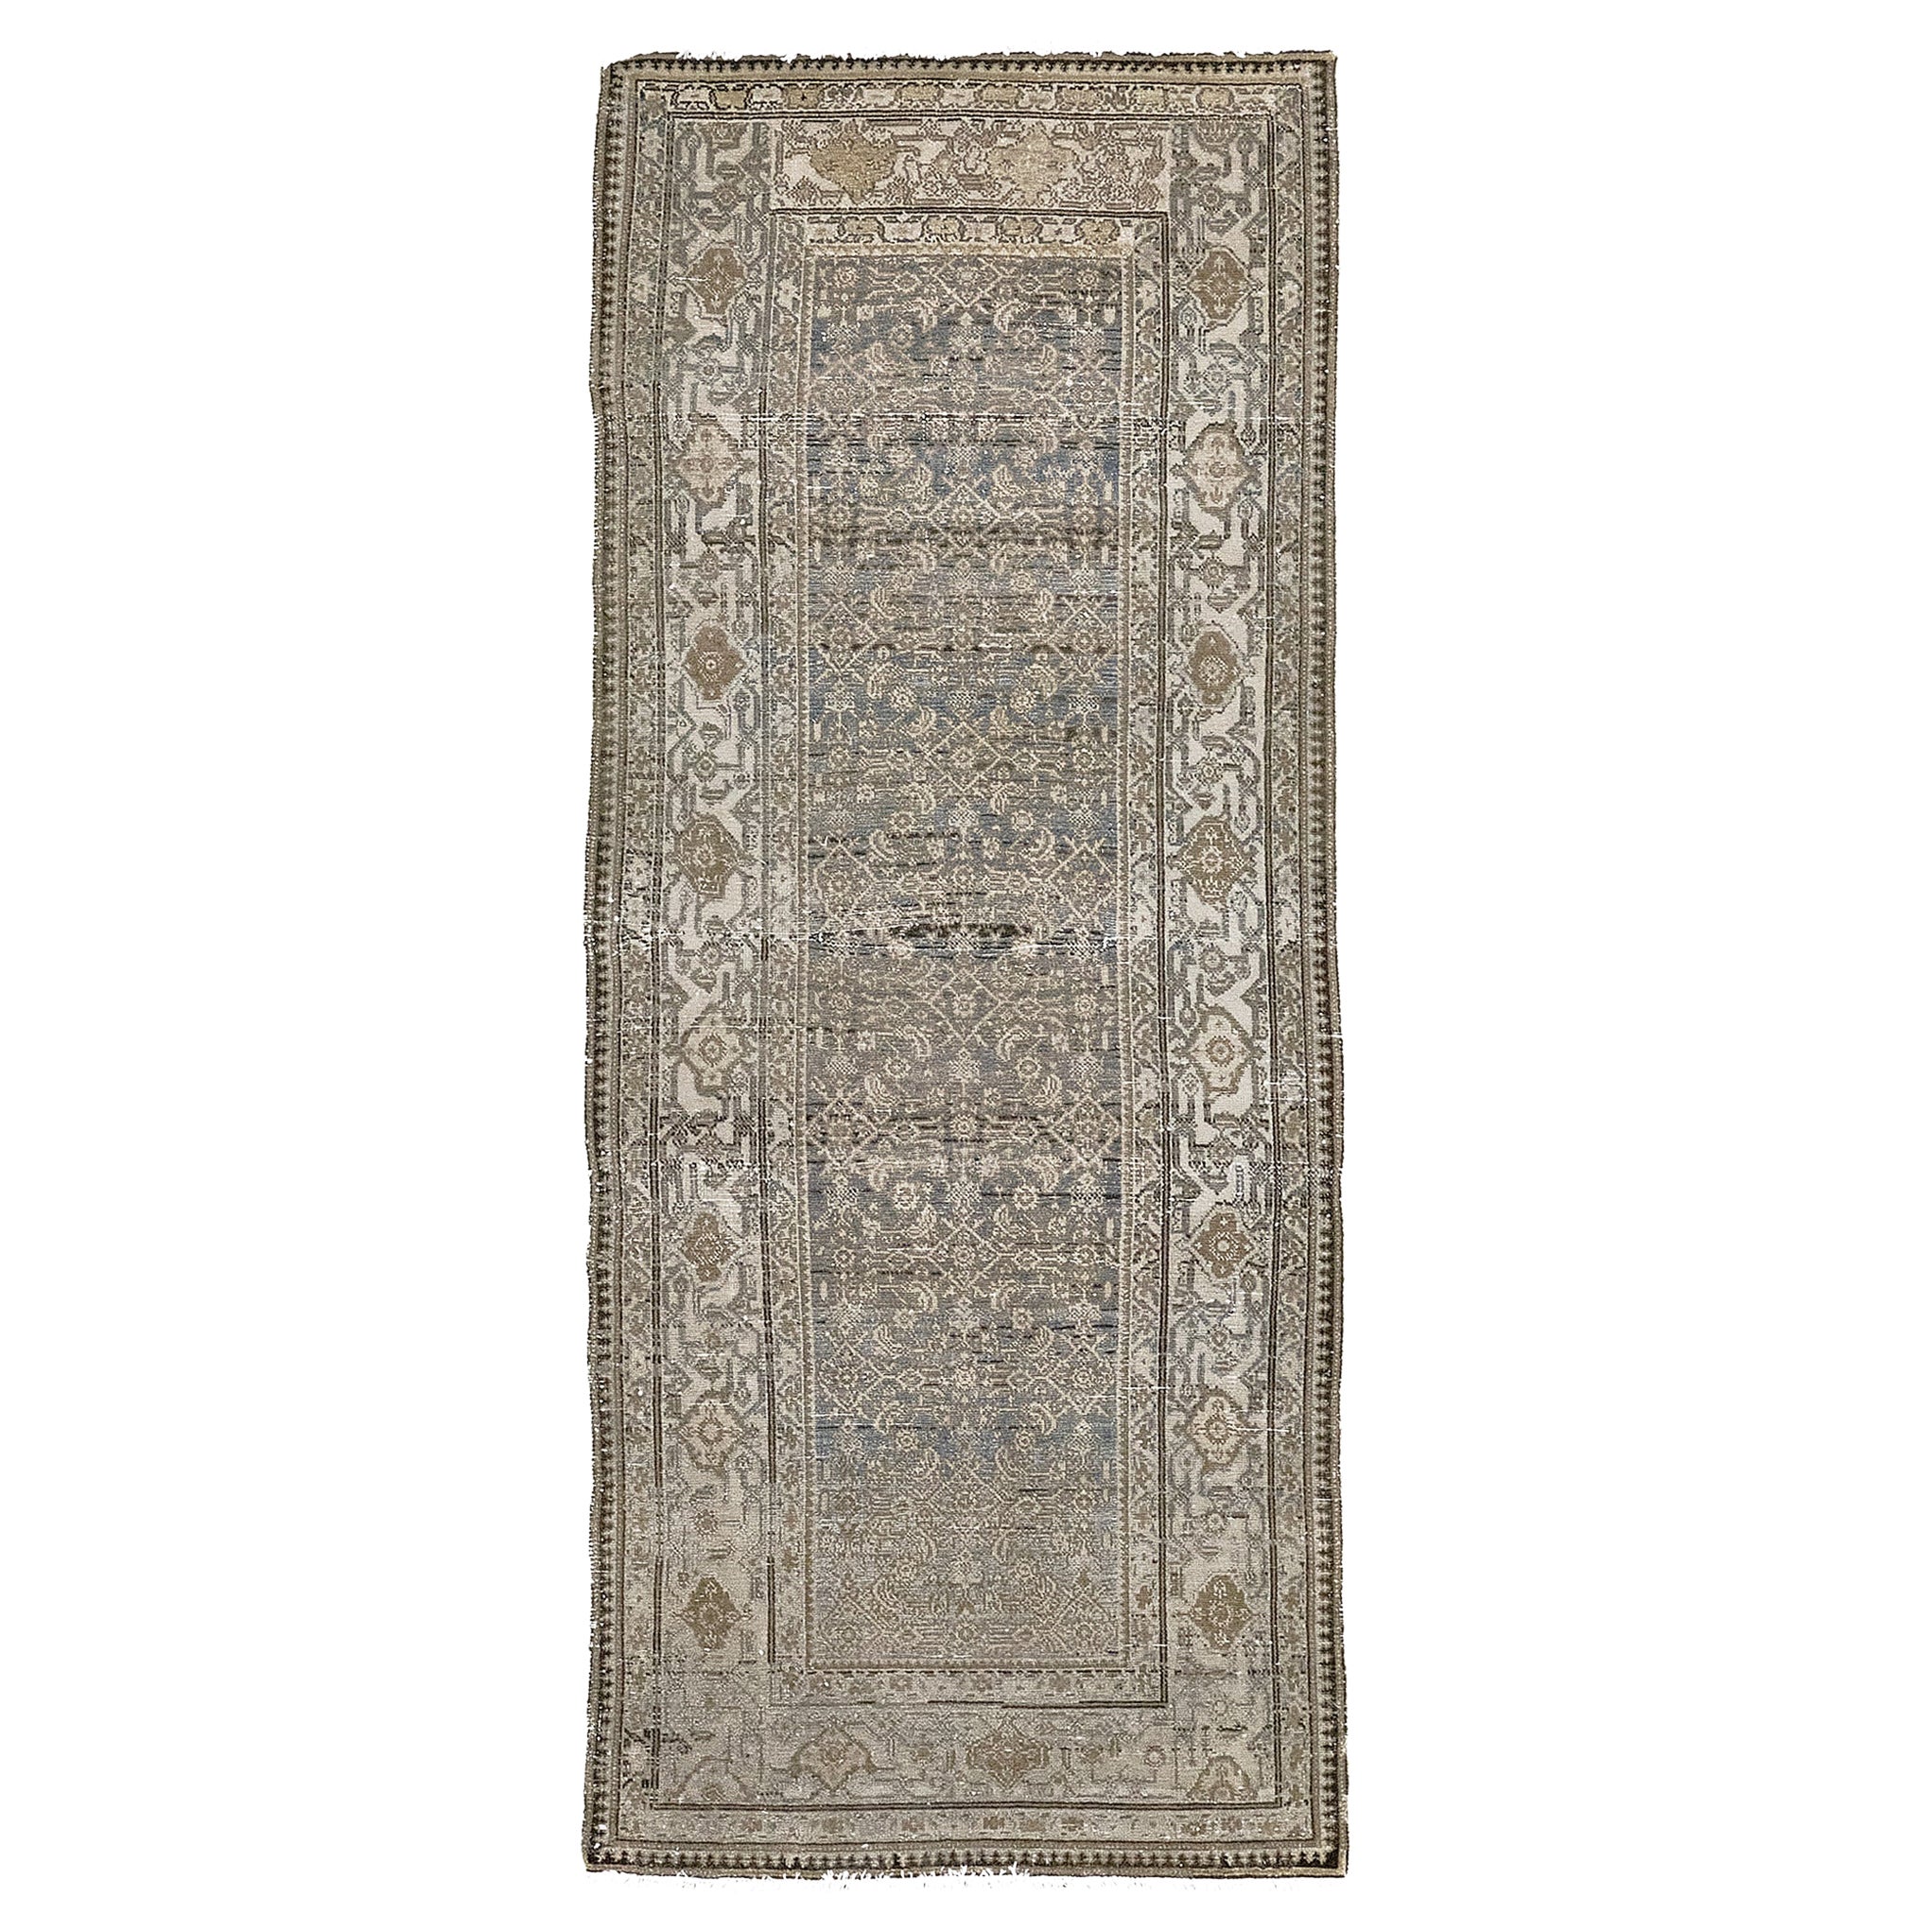 Antique Persian Malayer Rug 51130 For Sale